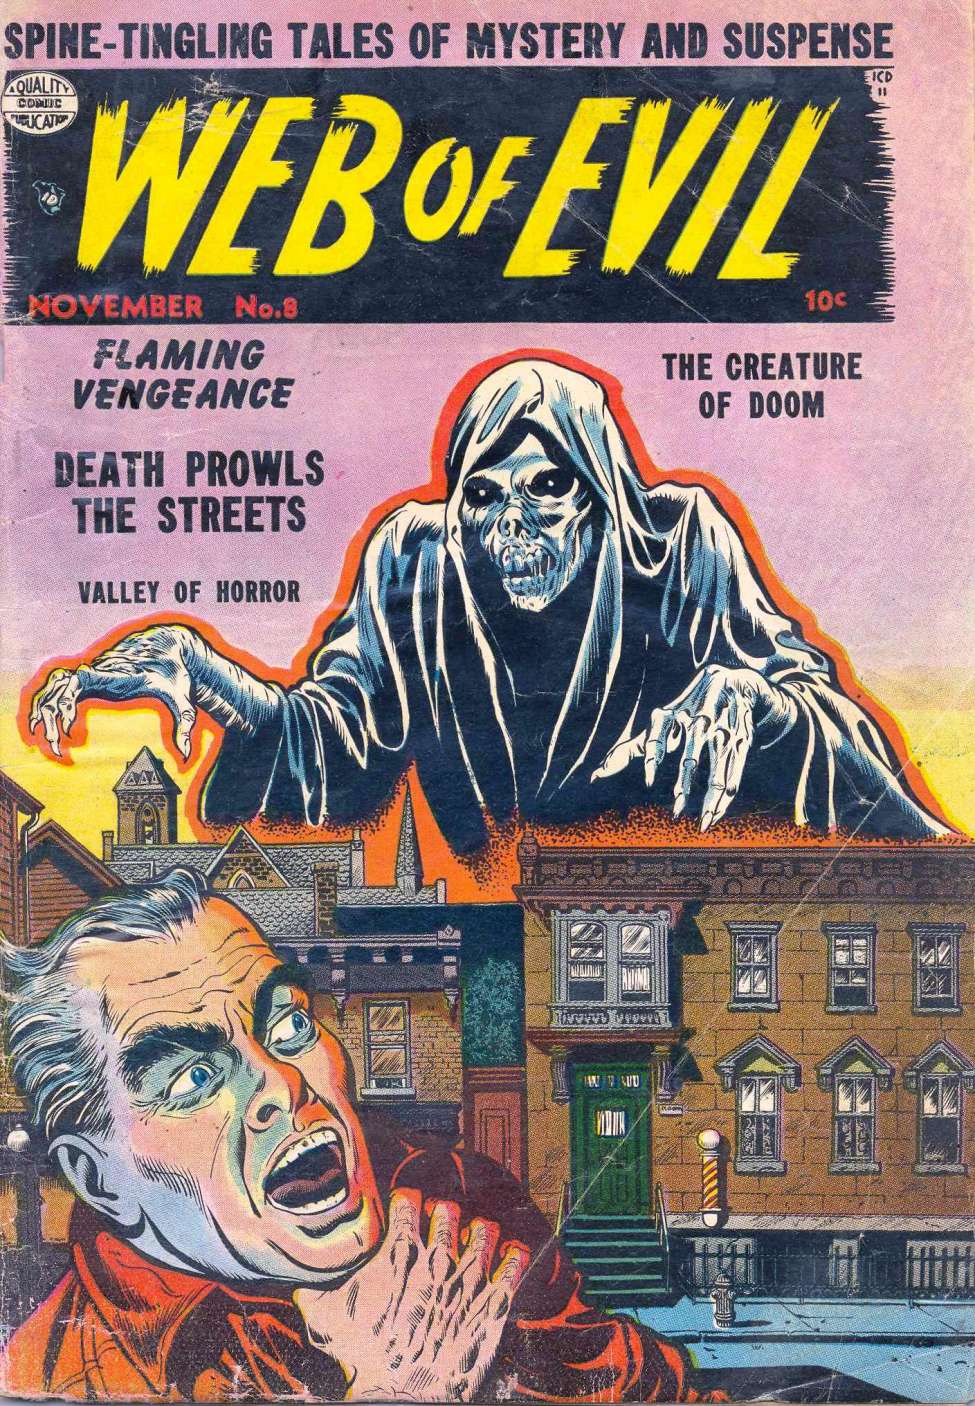 Comic Book Cover For Web of Evil 8